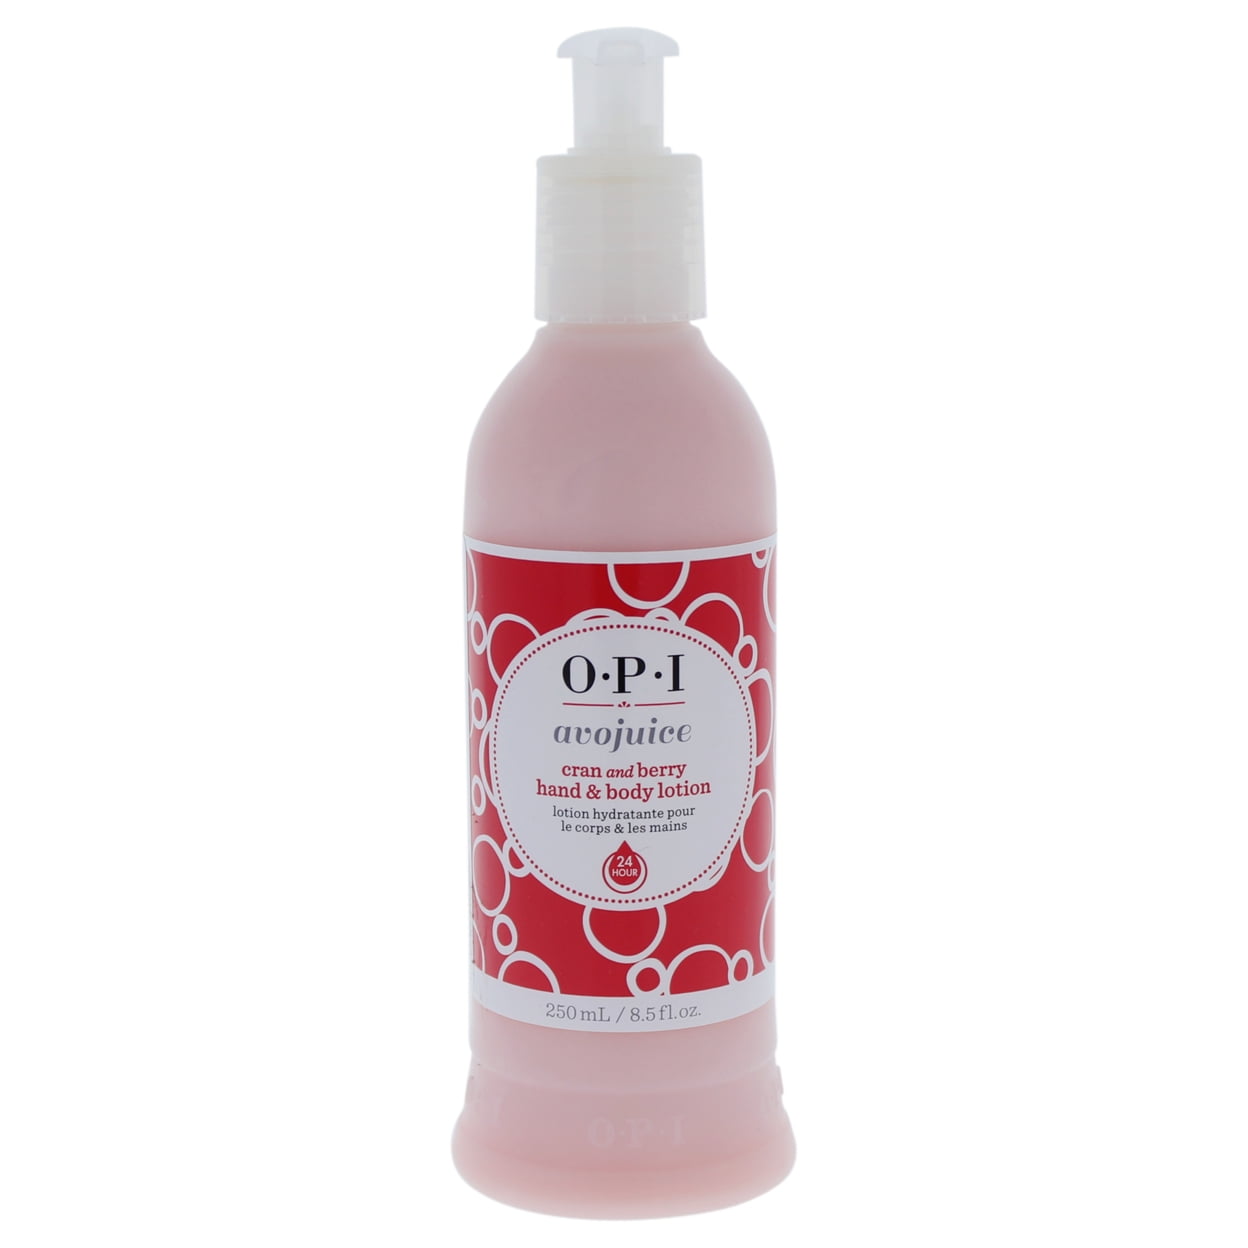 Avojuice Cran and Berry Hand & Body Lotion by OPI for Women - 8.5 oz Lotion